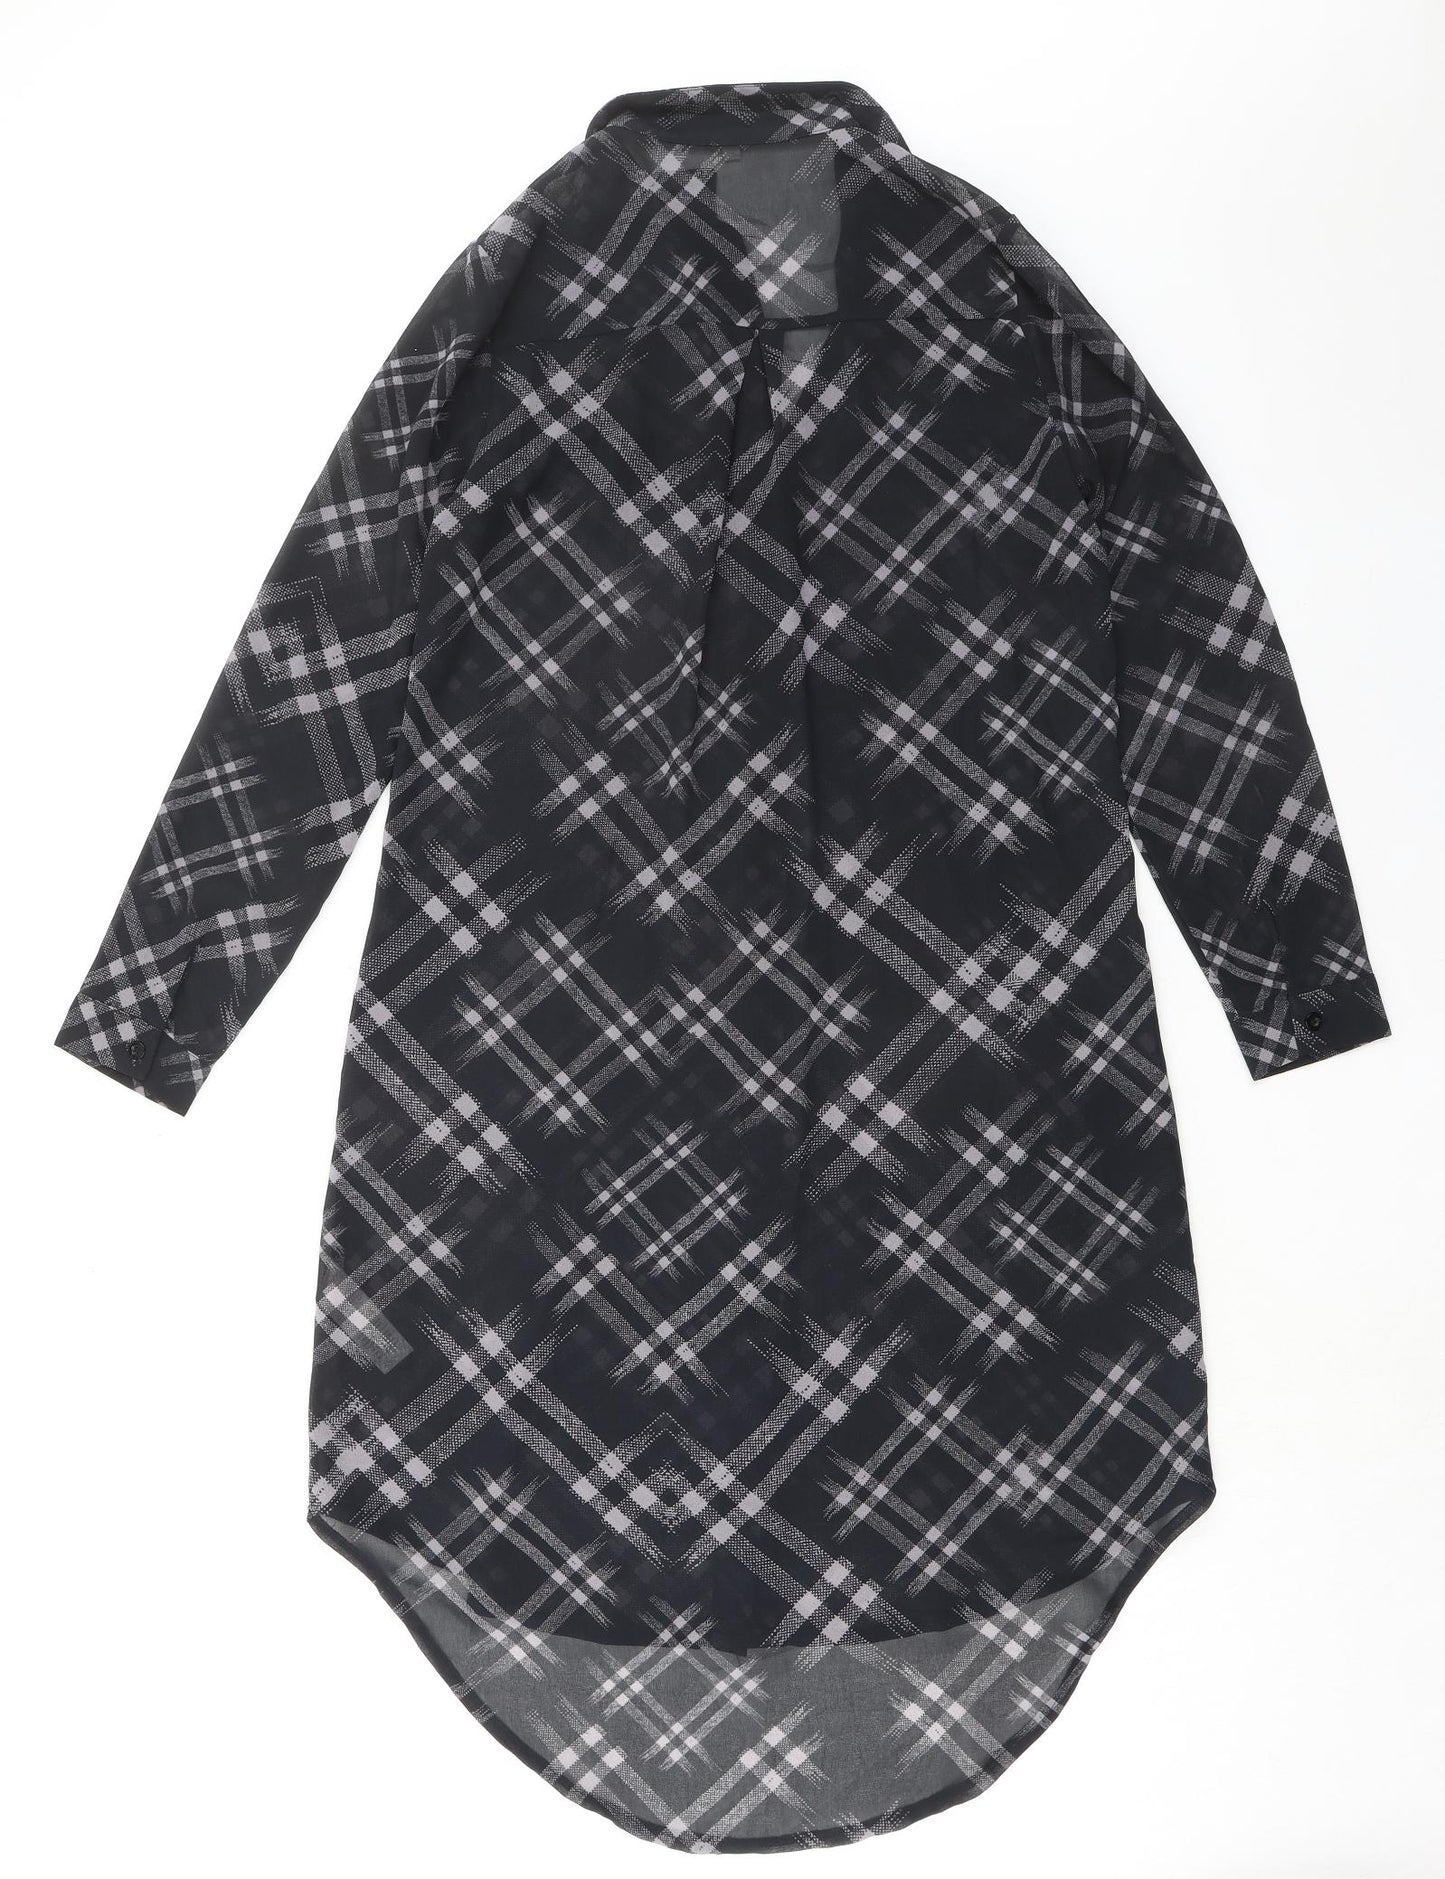 Apricot Womens Black Plaid Polyester Tunic Button-Up Size 8 Collared